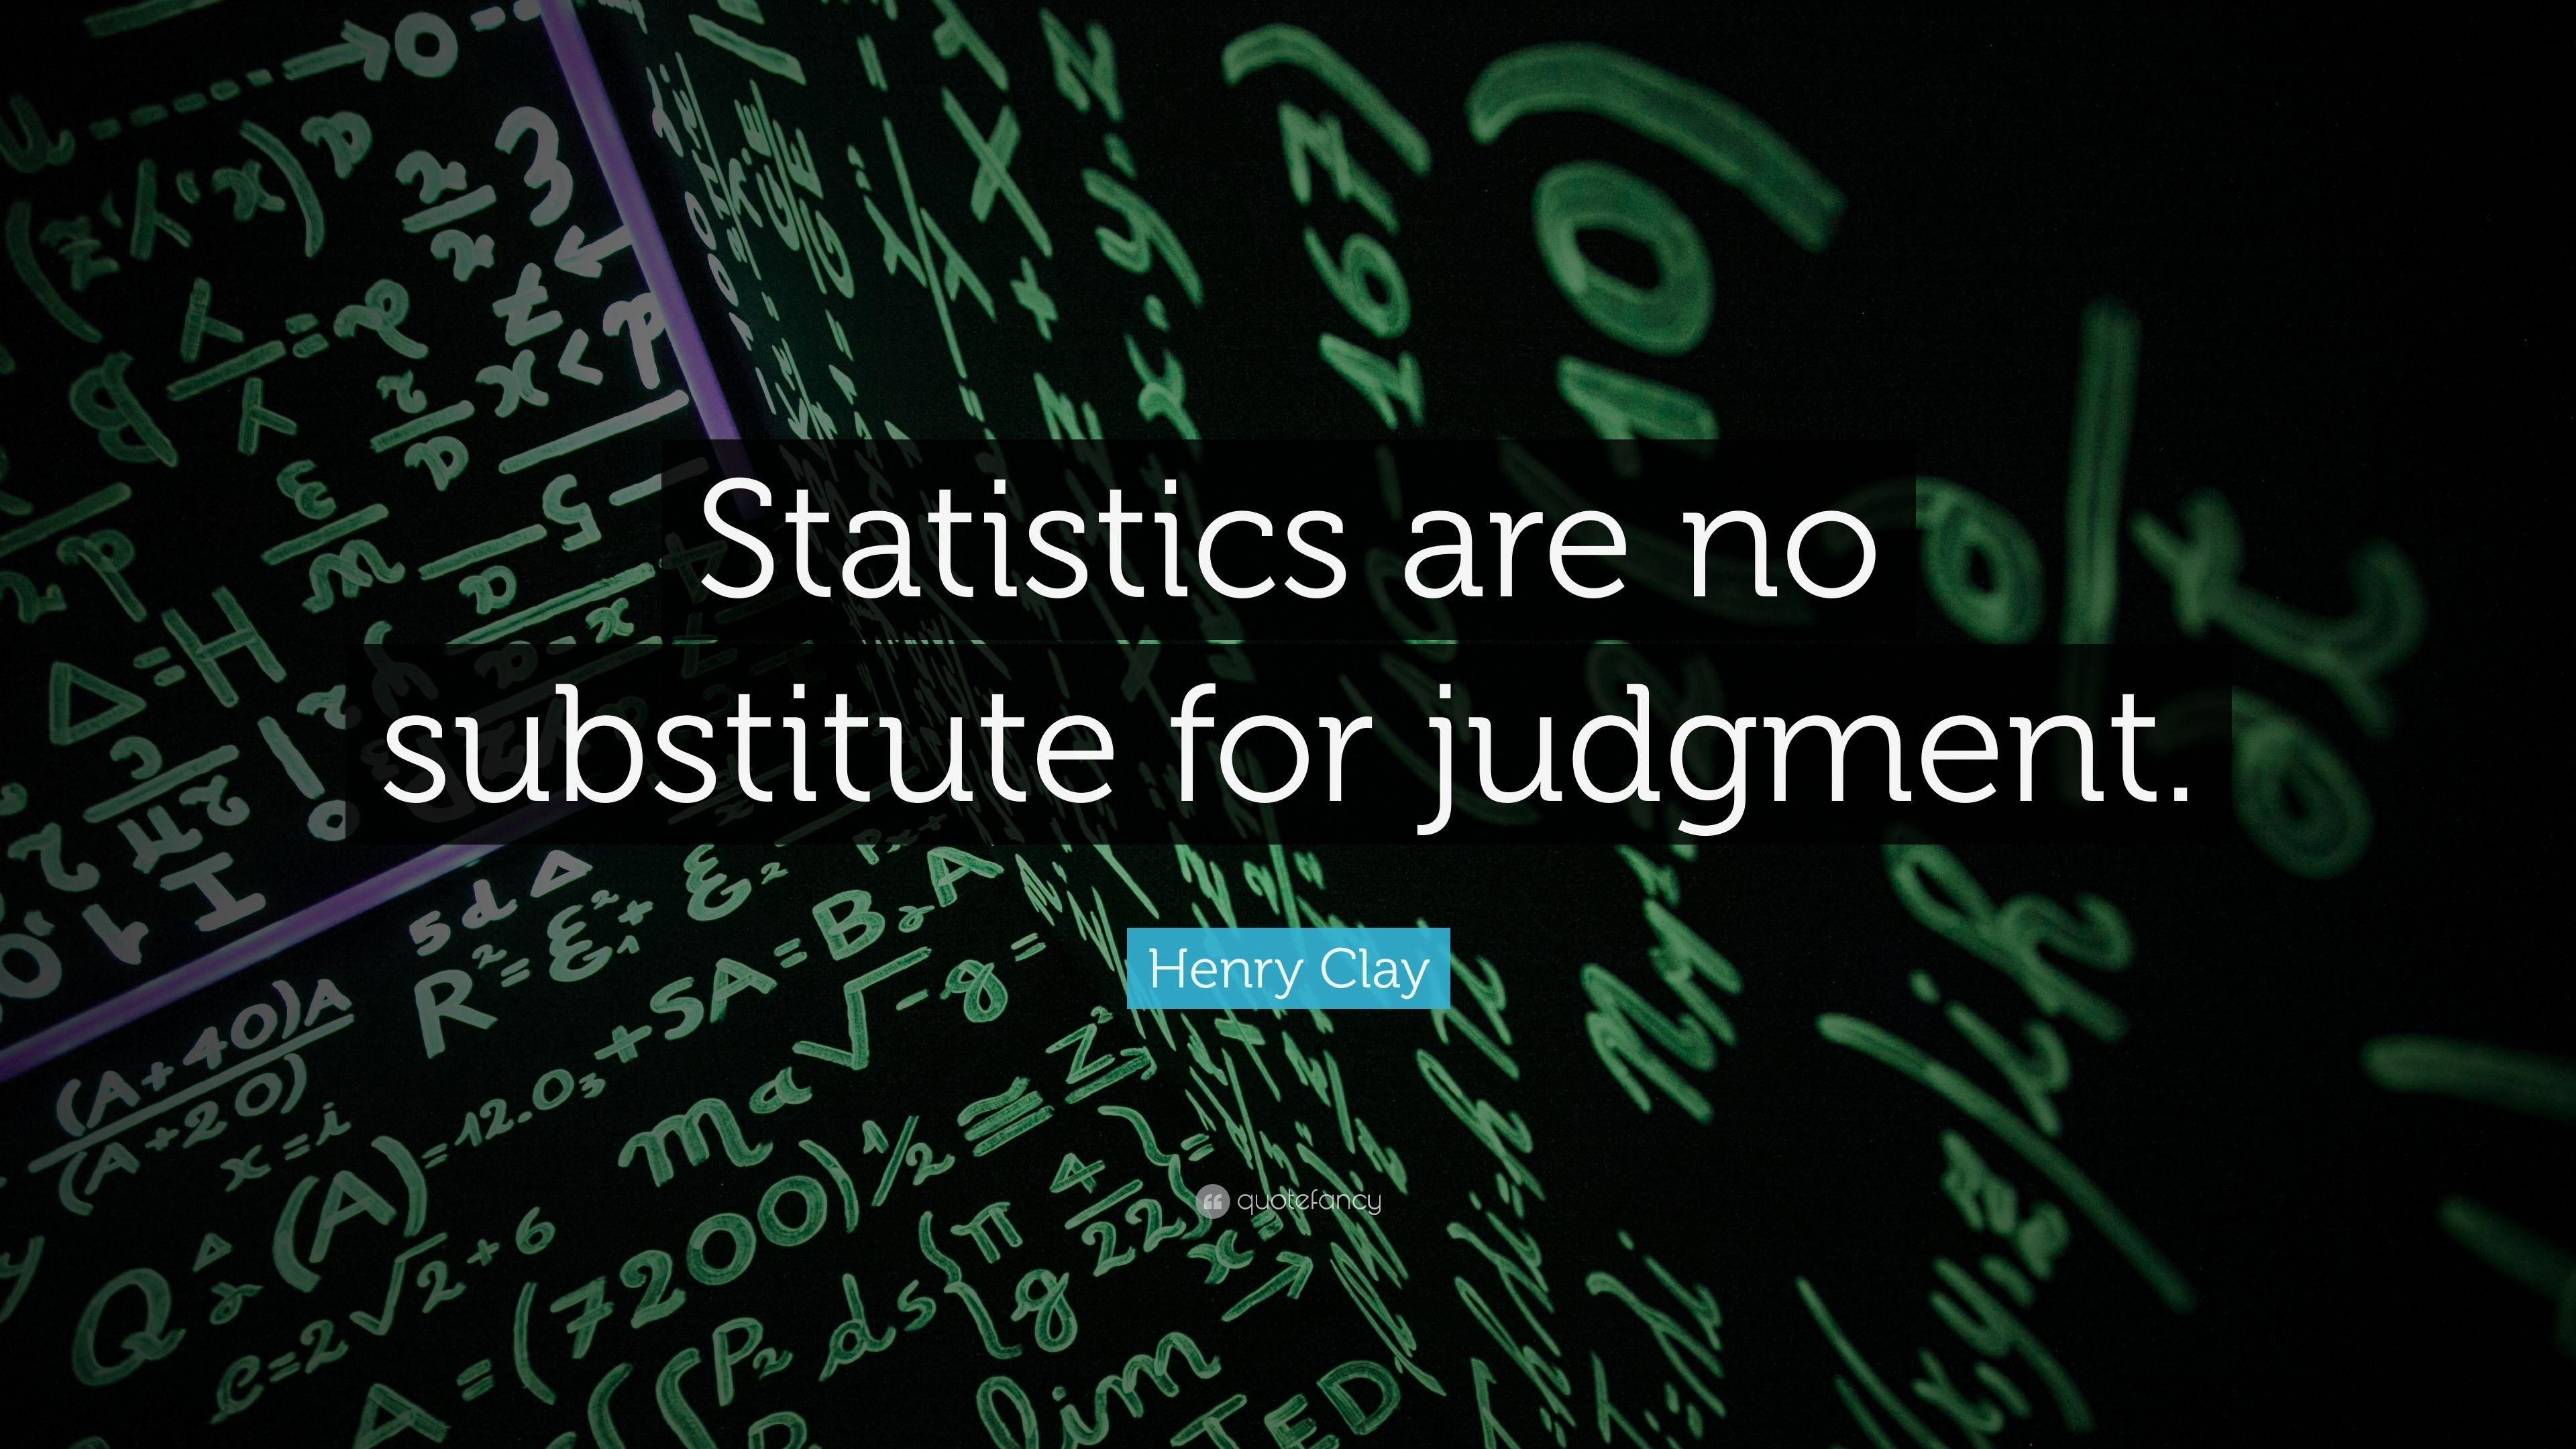 Henry Clay Quote: “Statistics are no substitute for judgment.” 7